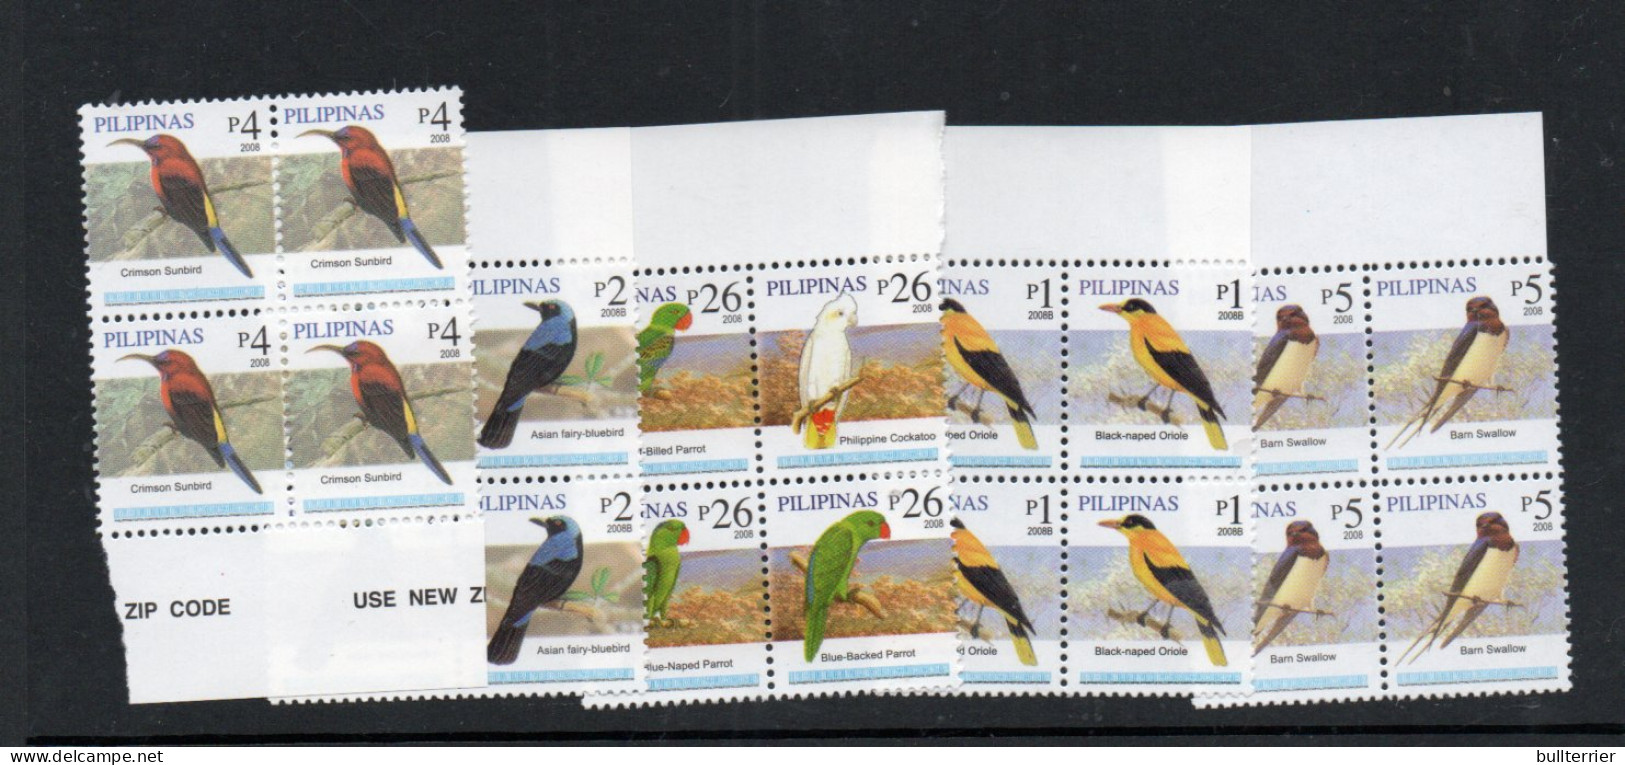 BIRDS - PHILIPPINES - 2007 - BIRDS SELECTION IN BLOCKS OF 4  MINT NEVER HINGED  - Búhos, Lechuza